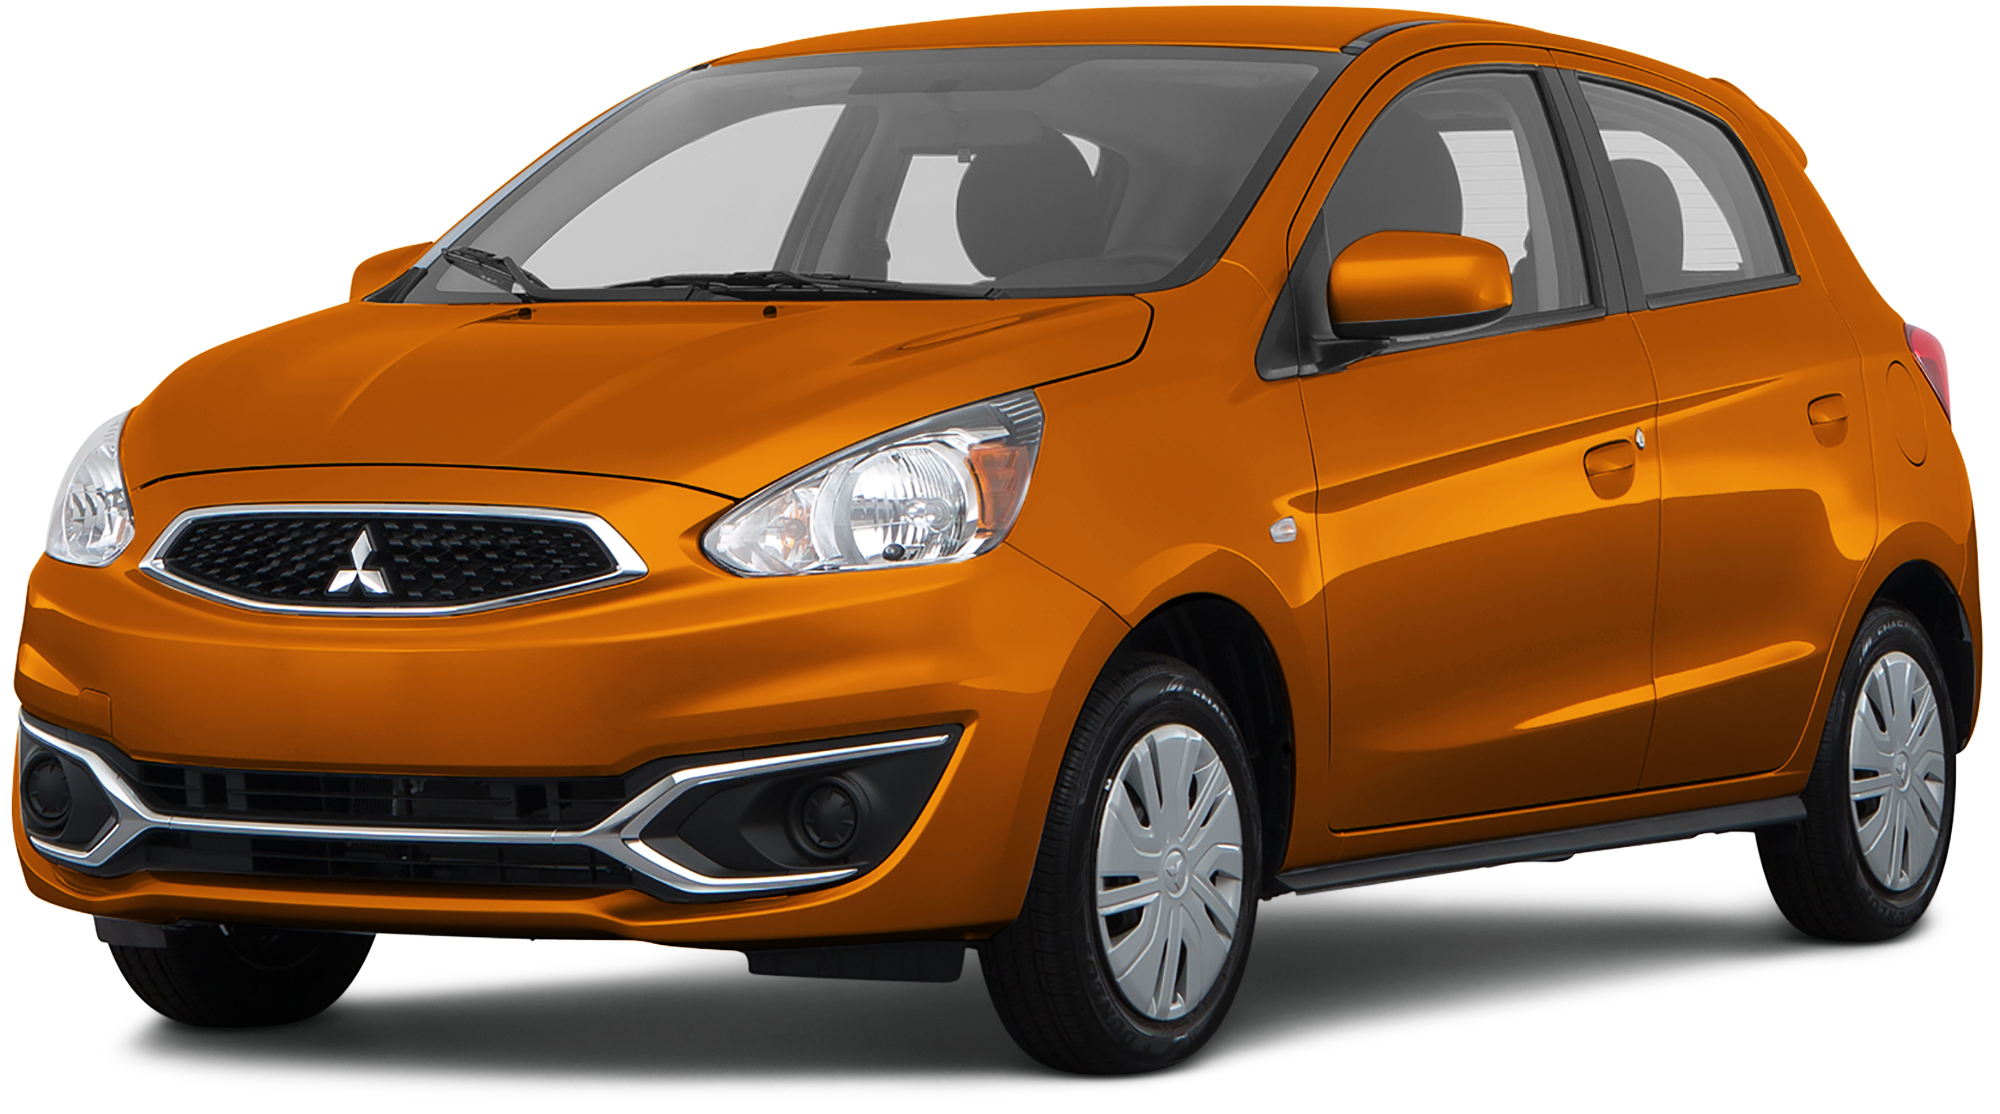 2020 Mitsubishi Mirage Incentives Specials Offers In Panama City FL